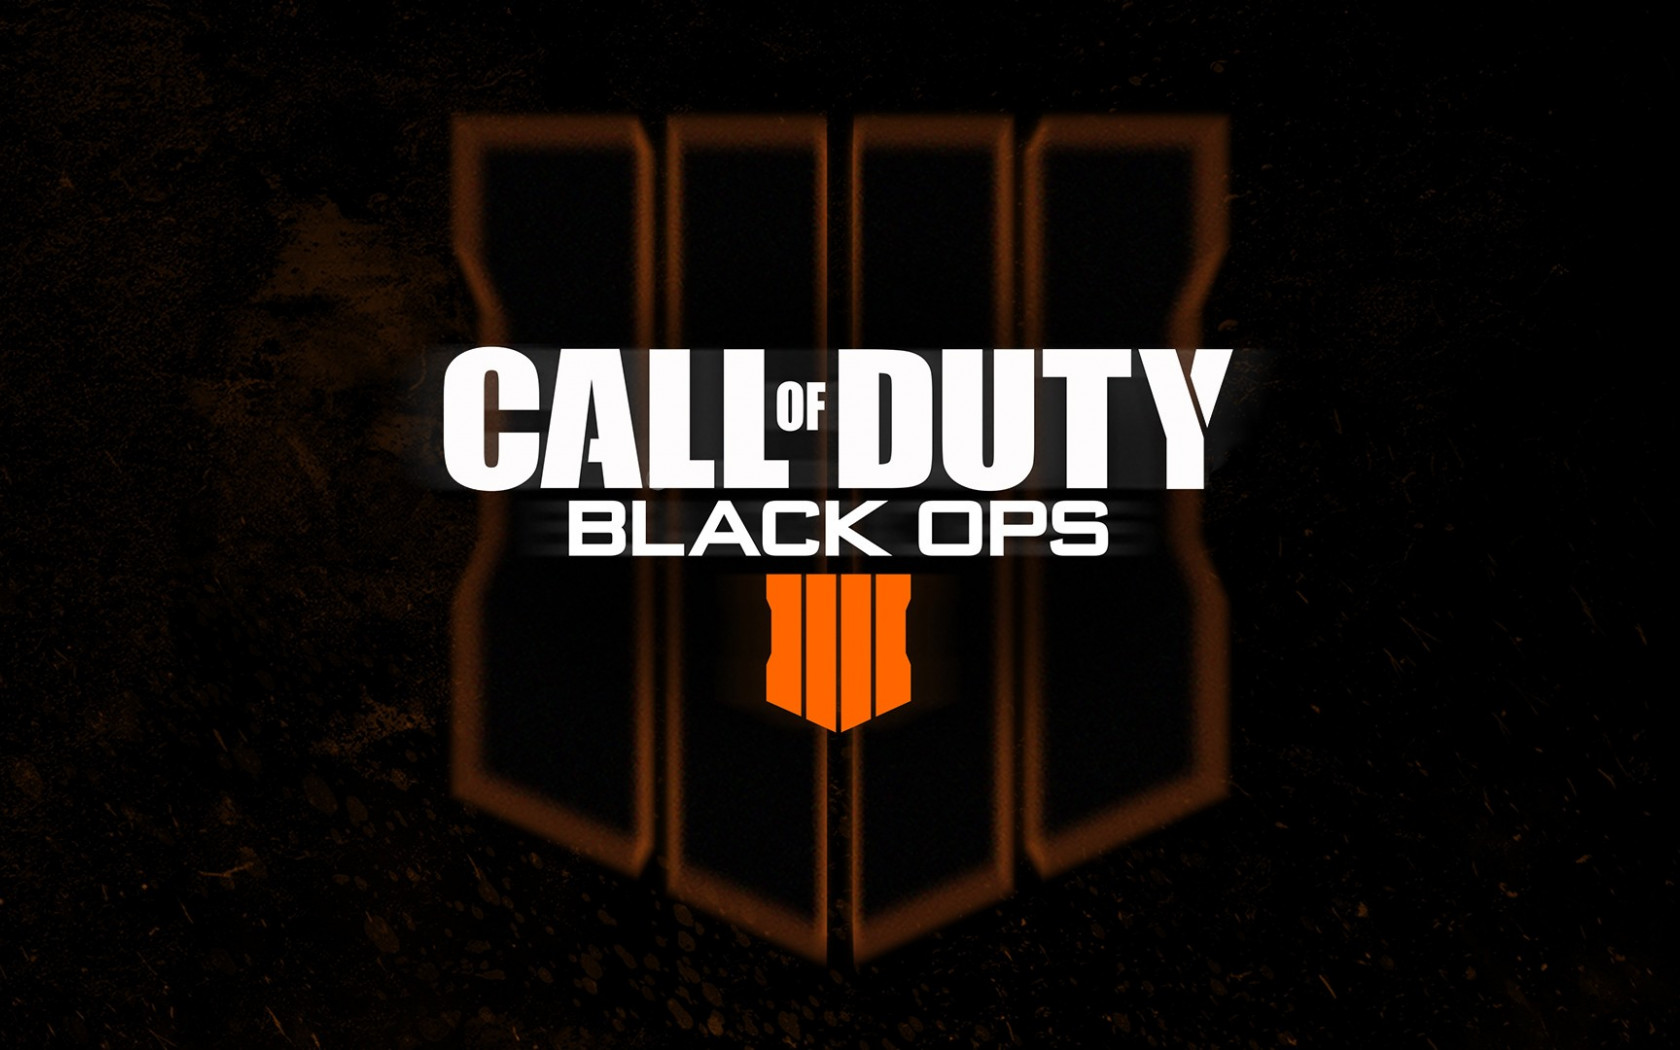 Call of Duty Black Ops 4 reveal wallpaper 1680x1050